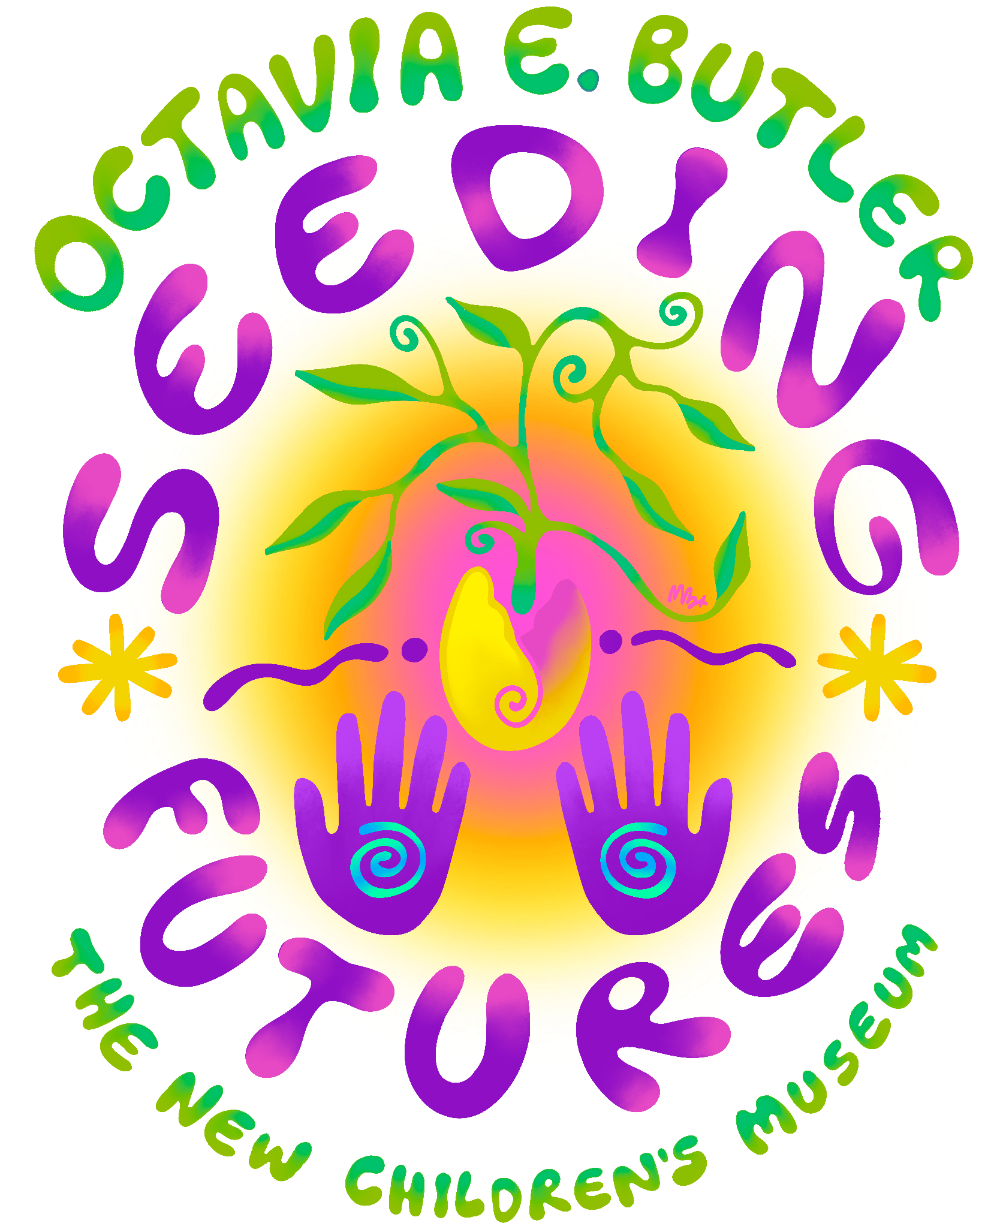 Octavia Butler Seeding Futures logo in purple and green text, with graphic of a yellow shell sprouting a green plant